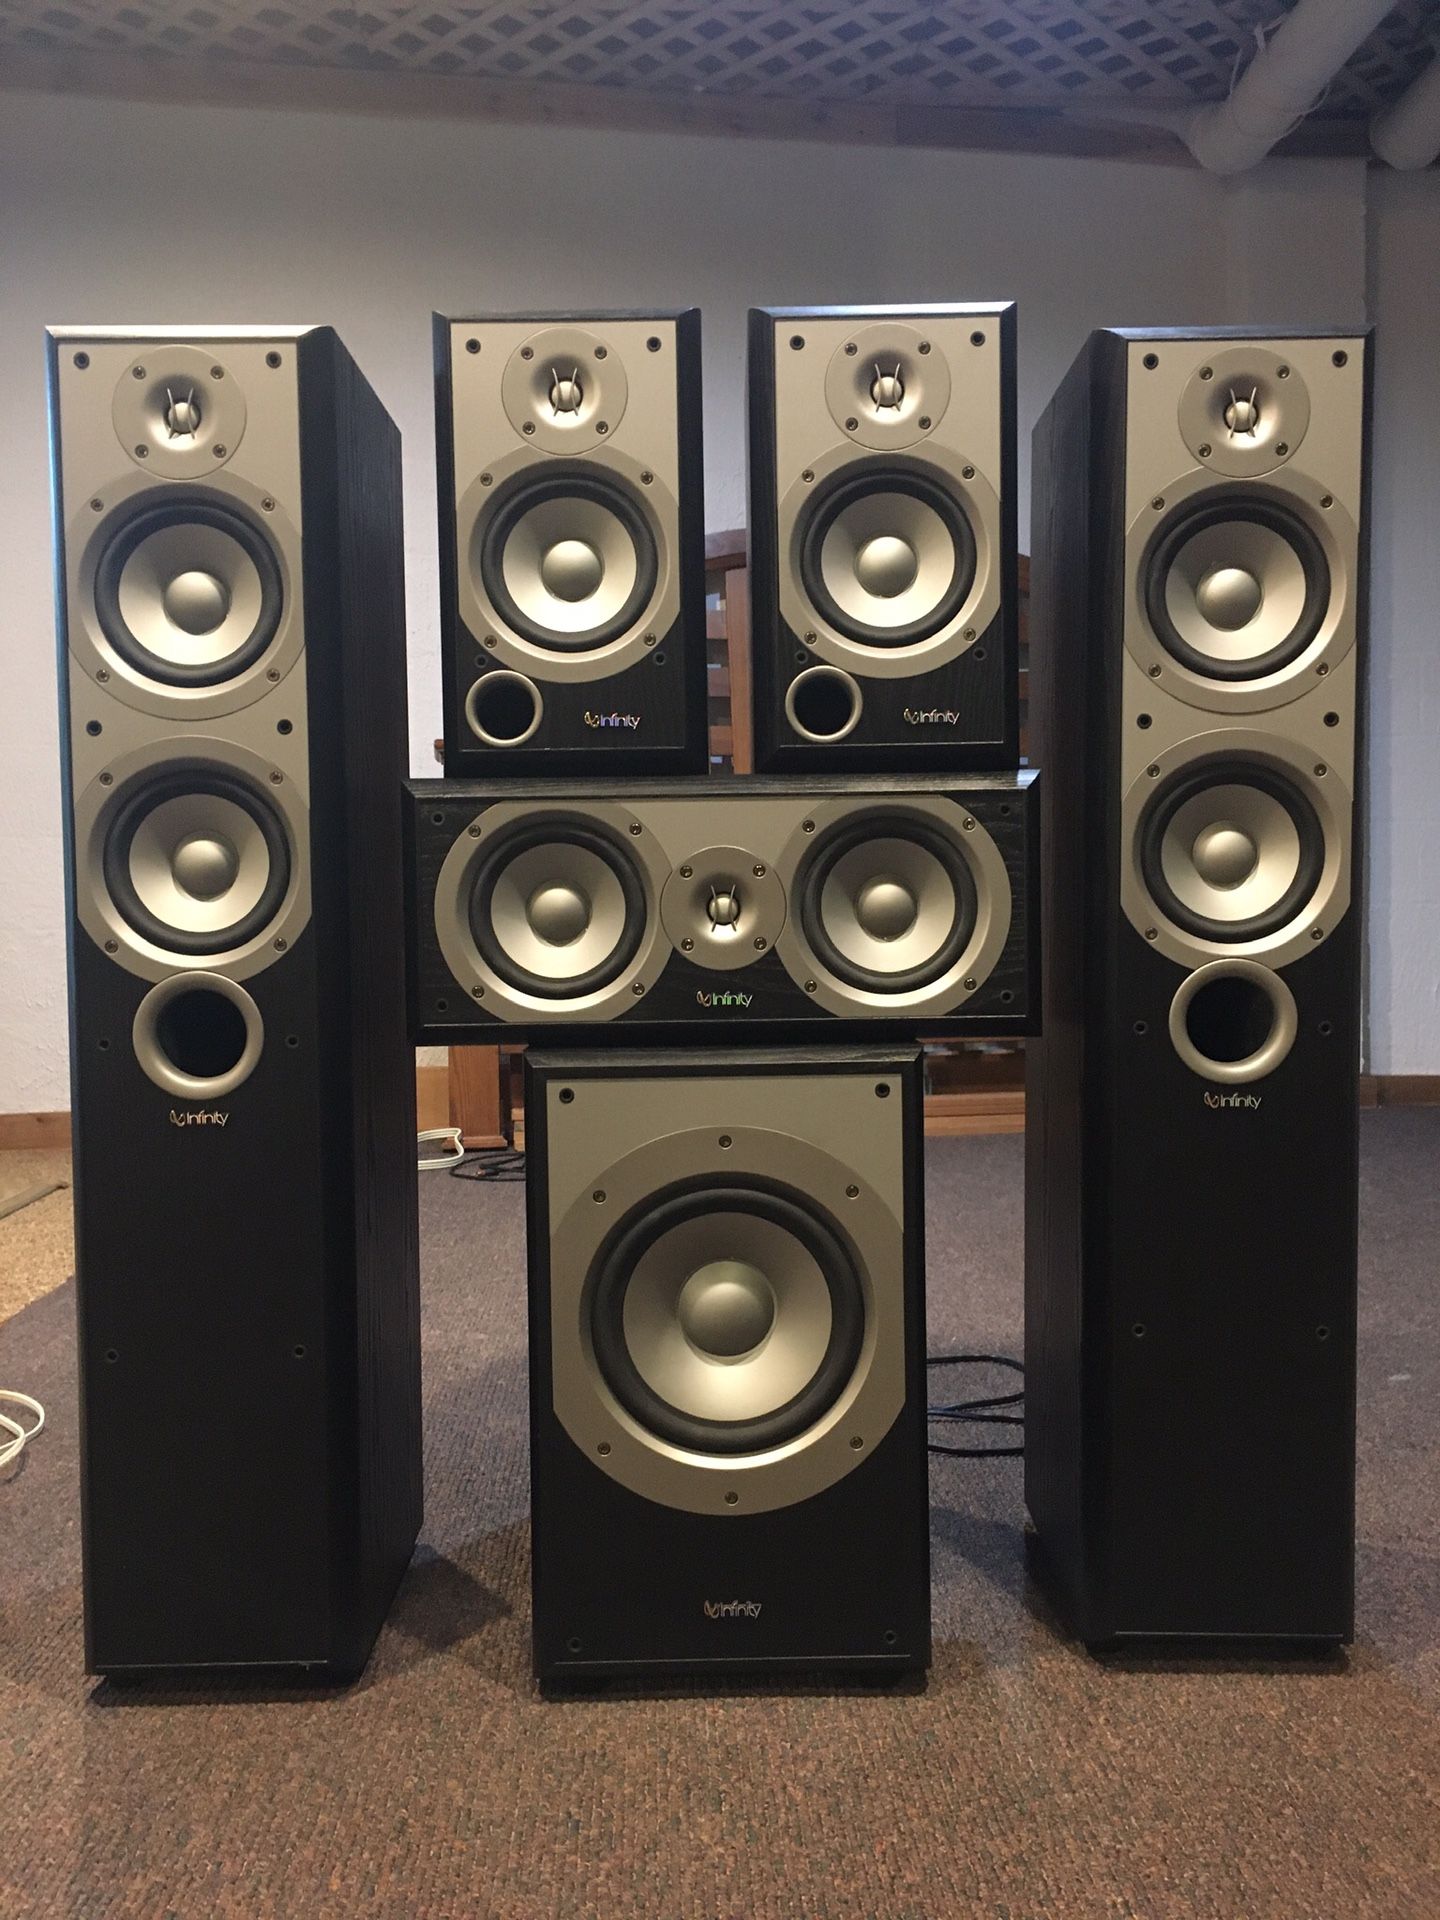 Multiple Infinity Speakers and Receiver for Home Entertainment Surround Sound